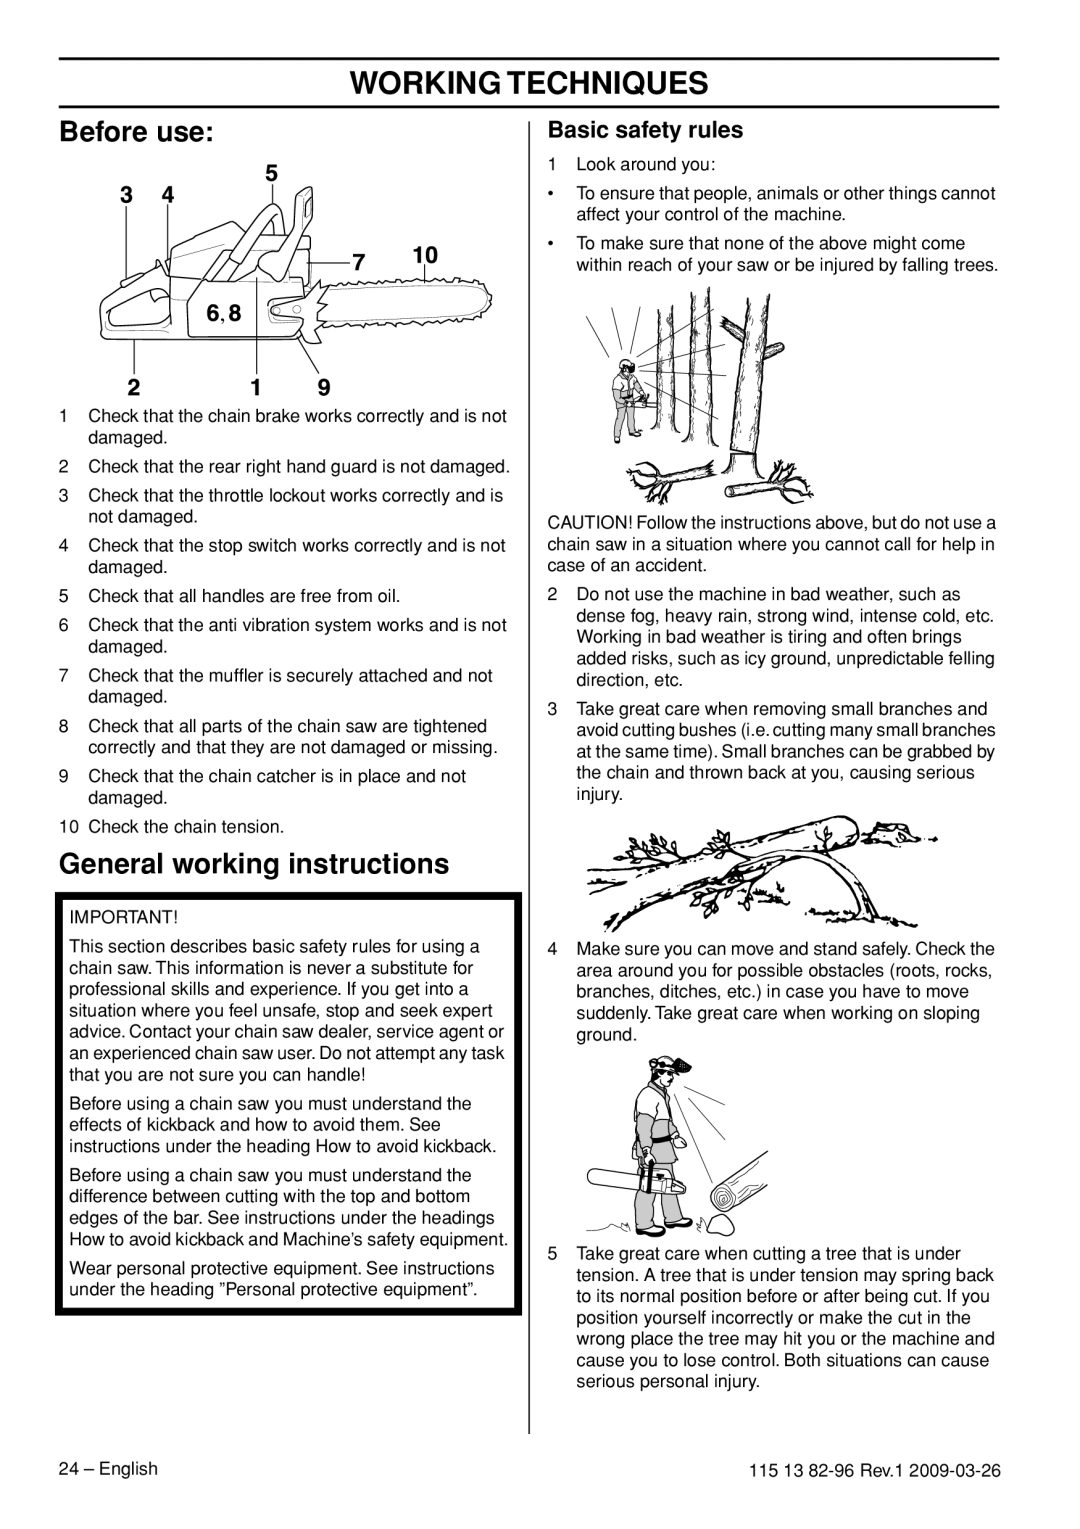 Husqvarna 460 Rancher, 115 13 82-96 manual Working Techniques, Before use, General working instructions, Basic safety rules 